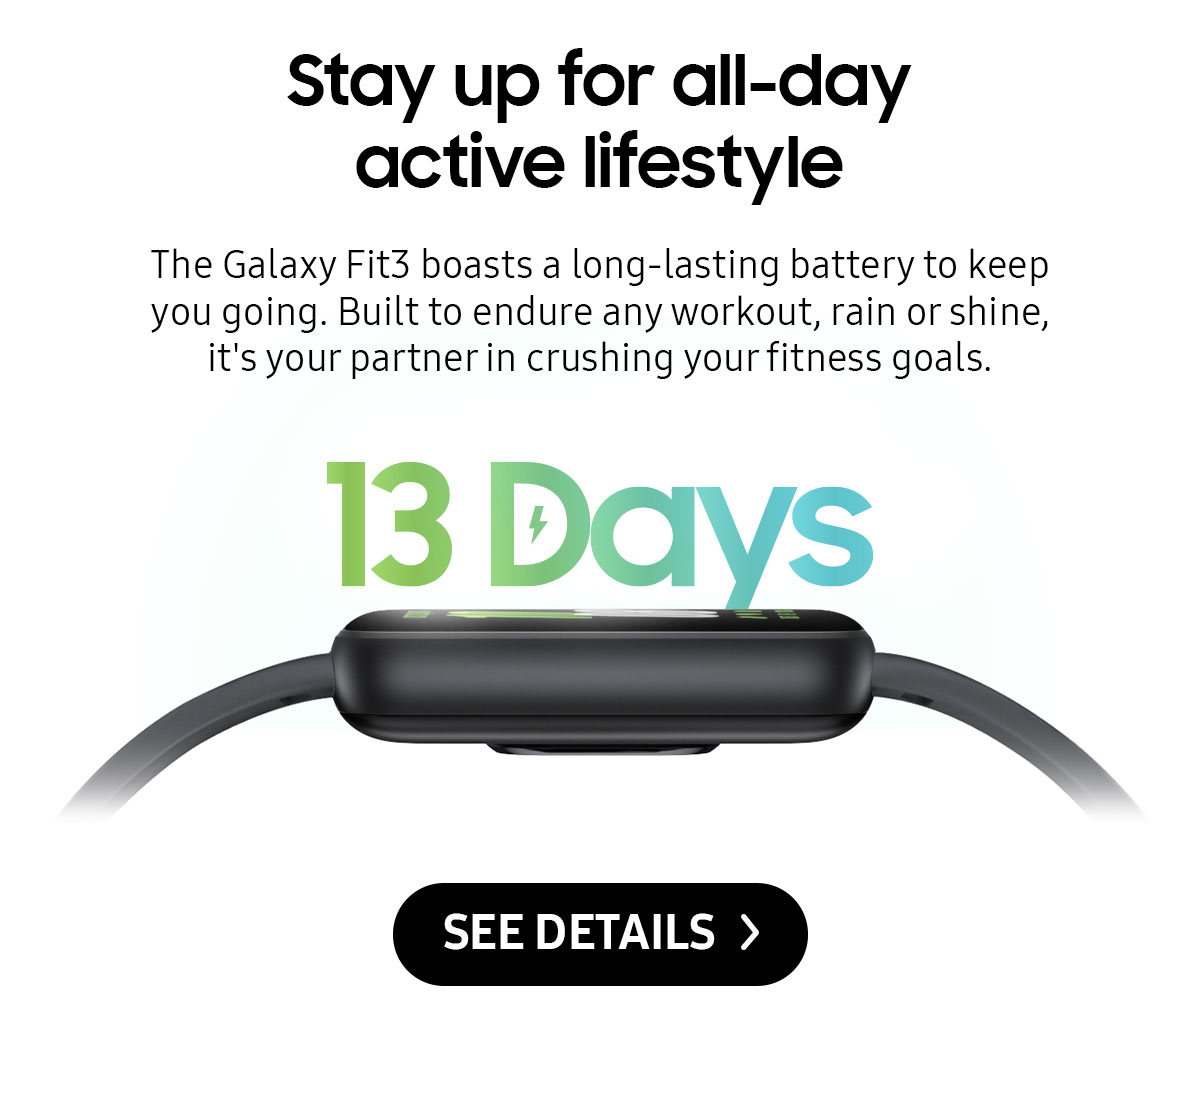 Stay up for all-day active lifestyle | The Galaxy Fit3 boasts a long-lasting battery to keep you going. Built to endure any workout, rain or shine, it's your partner in crushing your fitness goals.